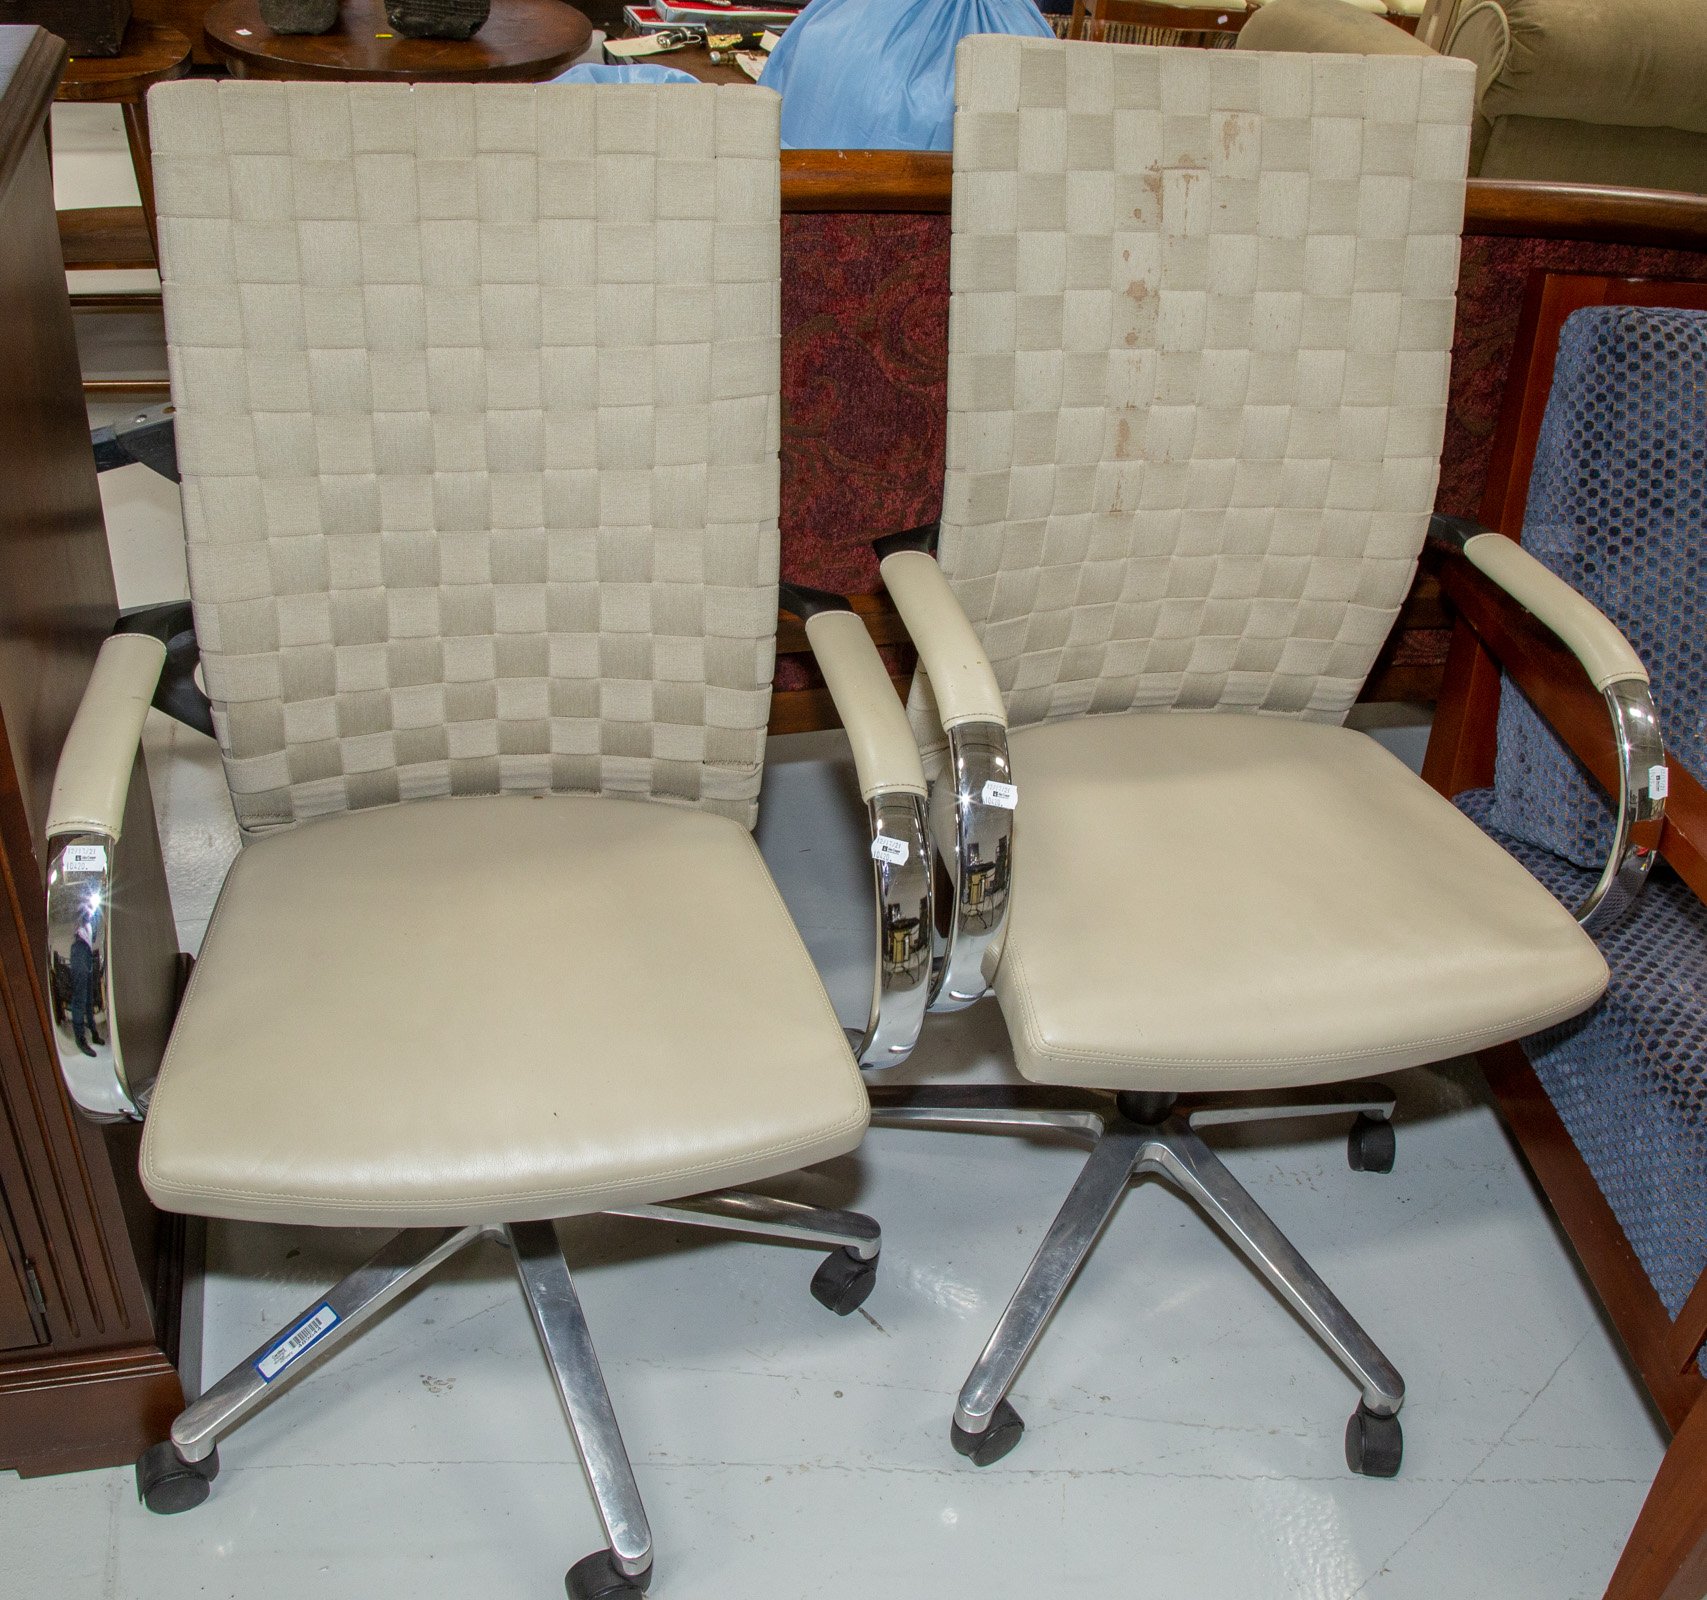 A PAIR OF MODERN DESK CHAIRS With